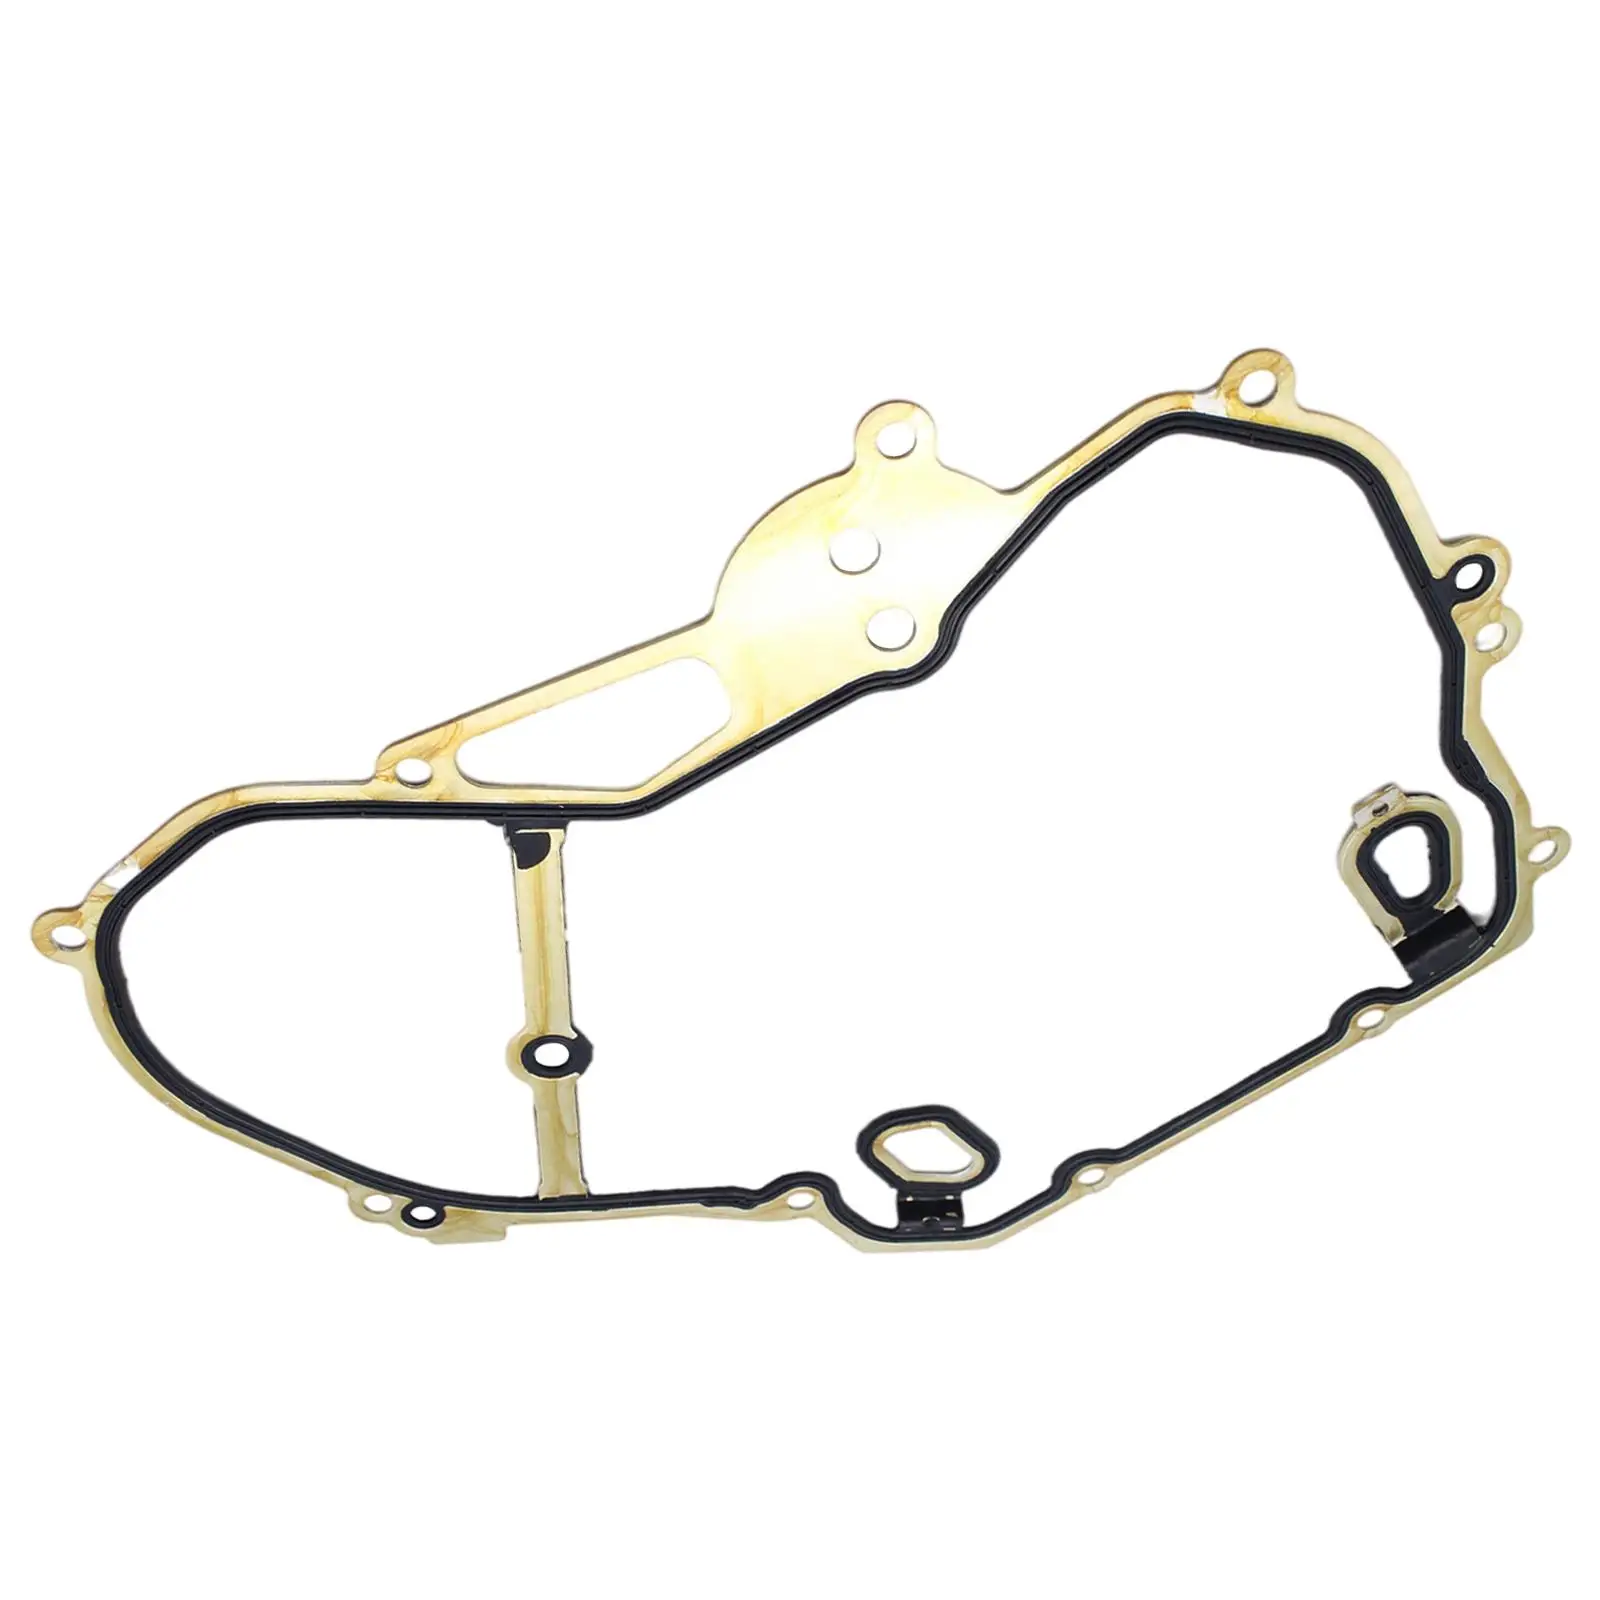 Timing Cover Gasket, Parts Car 14130912 Replace, Accessories Fit for  HHR ,  Ltz, Hybrid  L